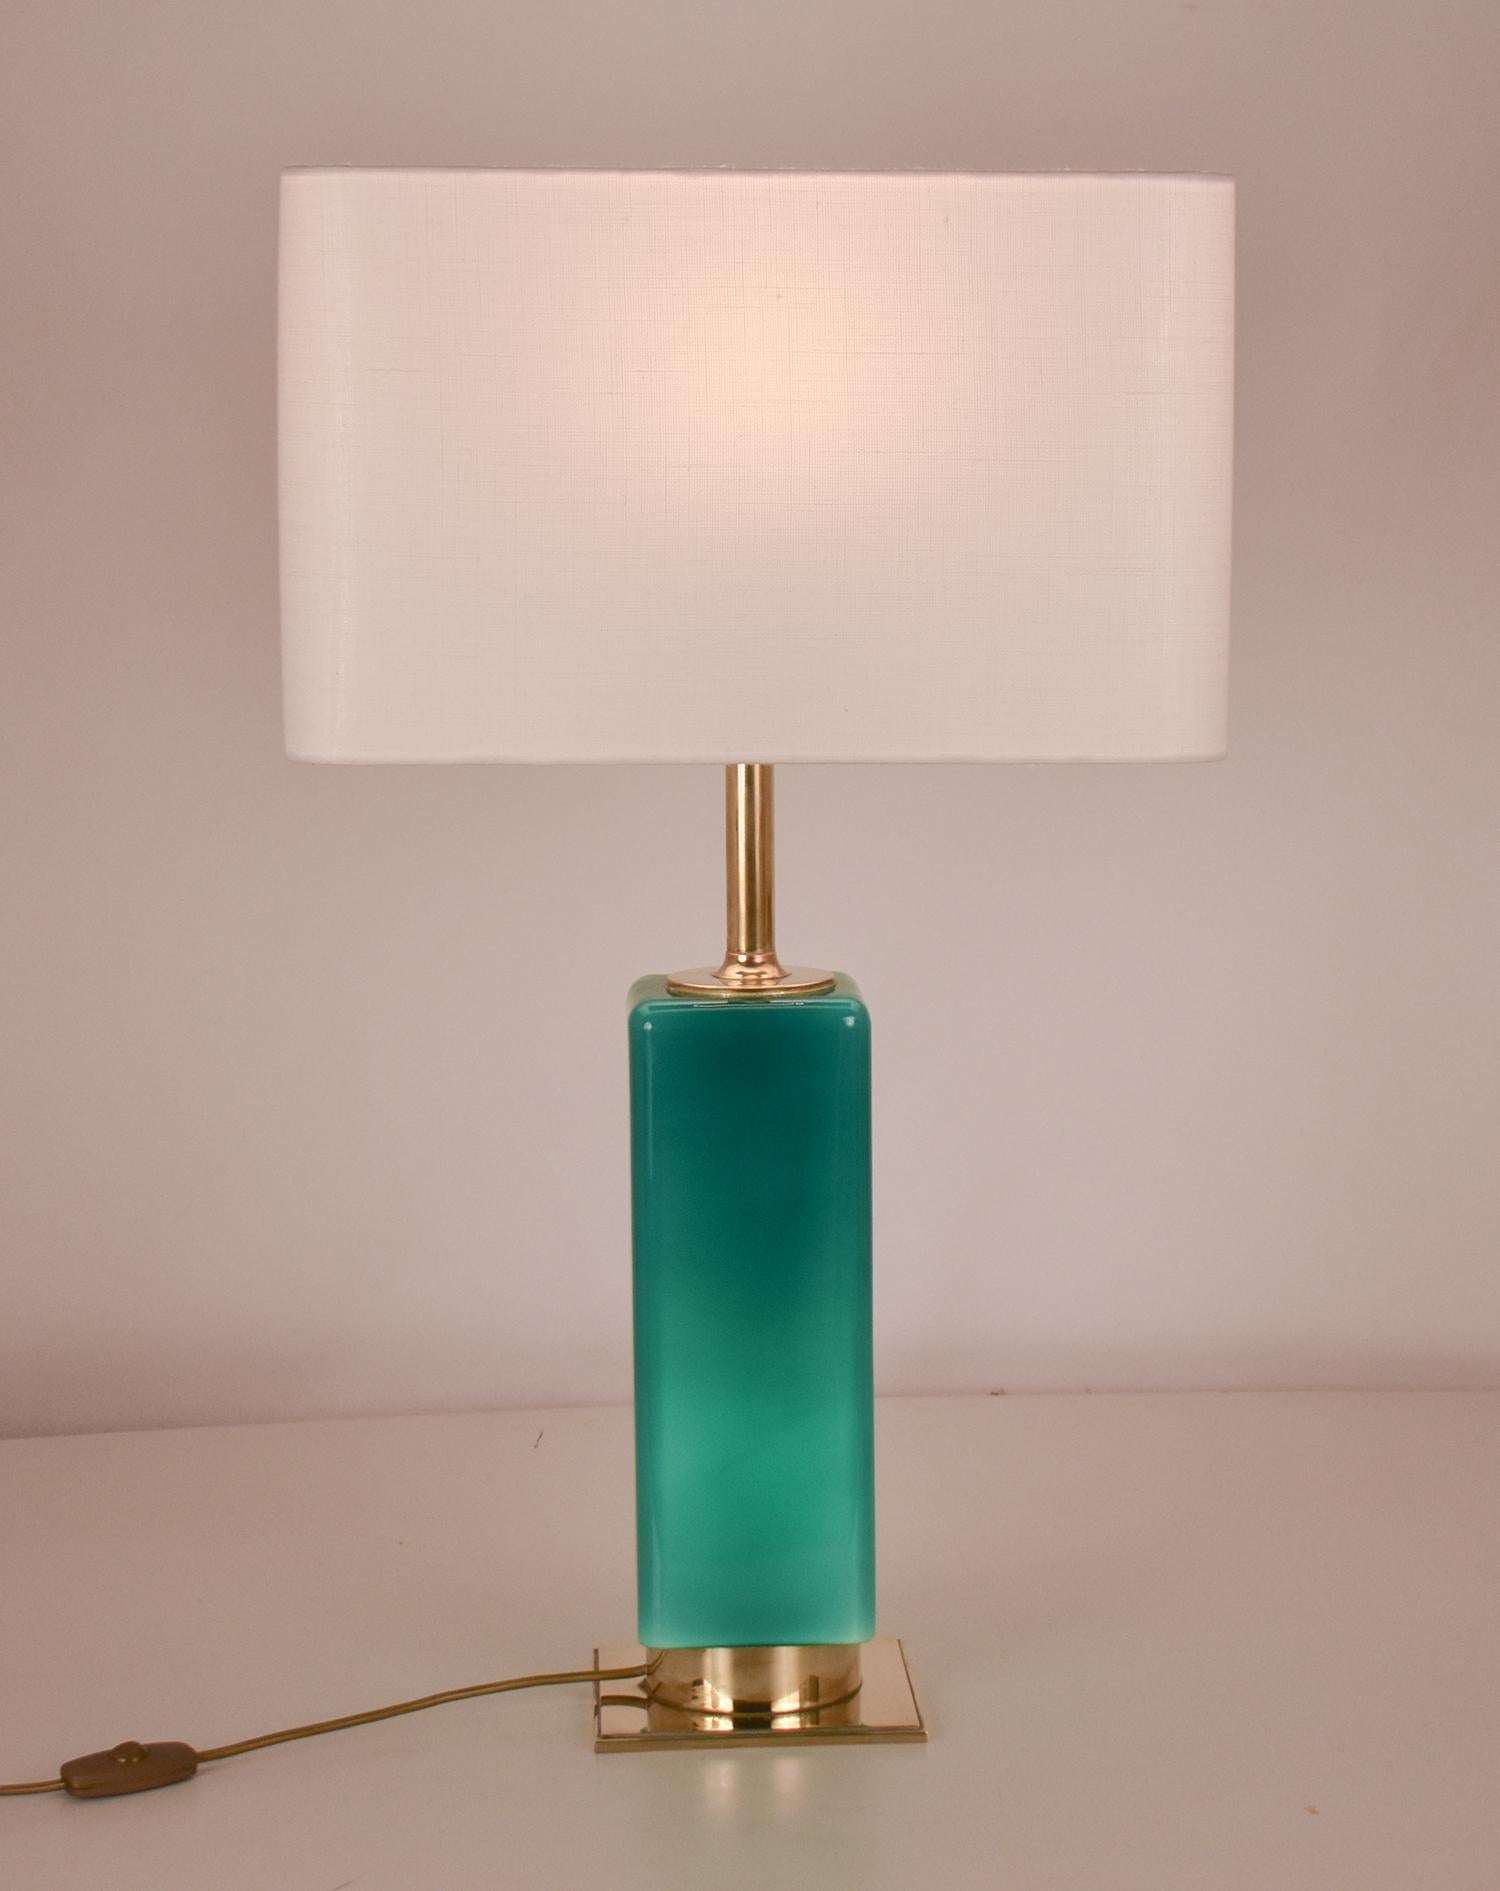 Mid- Century Large Green Glass and Brass Table Lamp Metalarte, Spain, 1970's For Sale 2